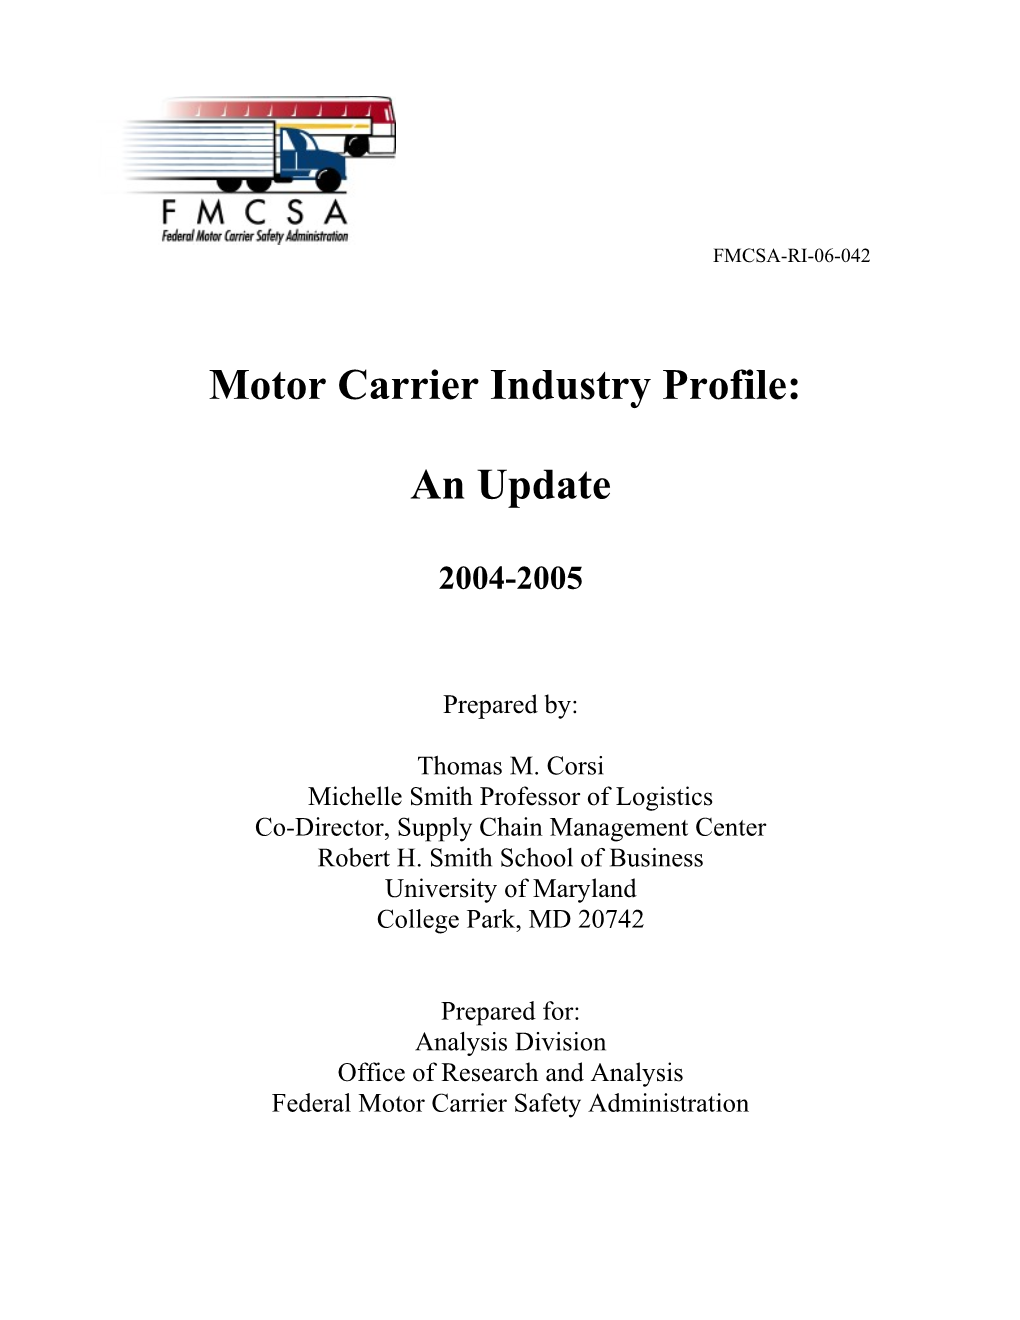 Motor Carrier Industry Profile: an Update